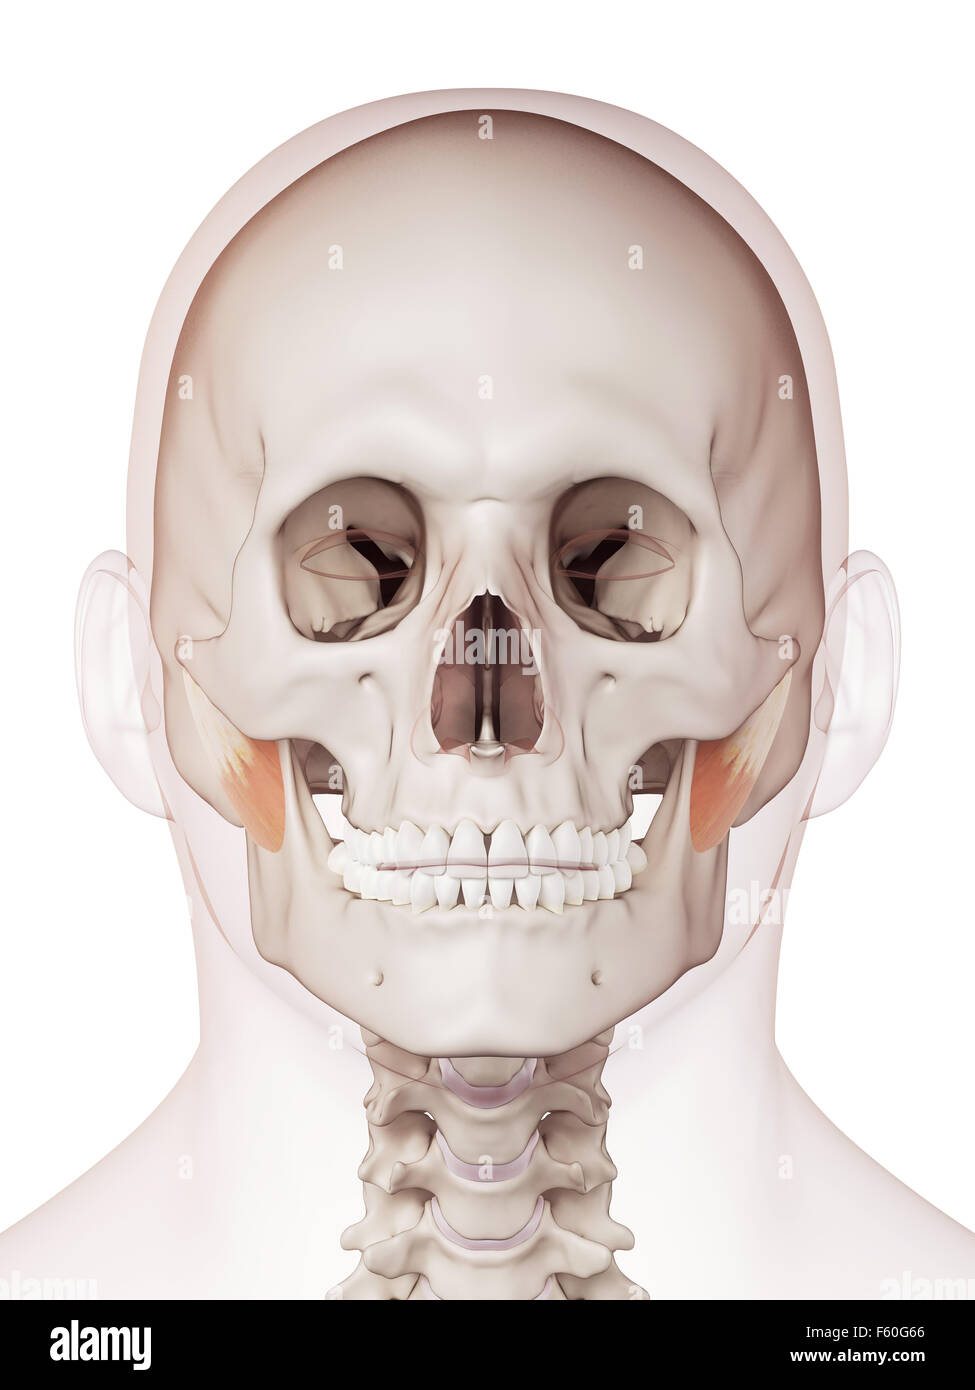 medically accurate muscle illustration of the masseter deep Stock Photo